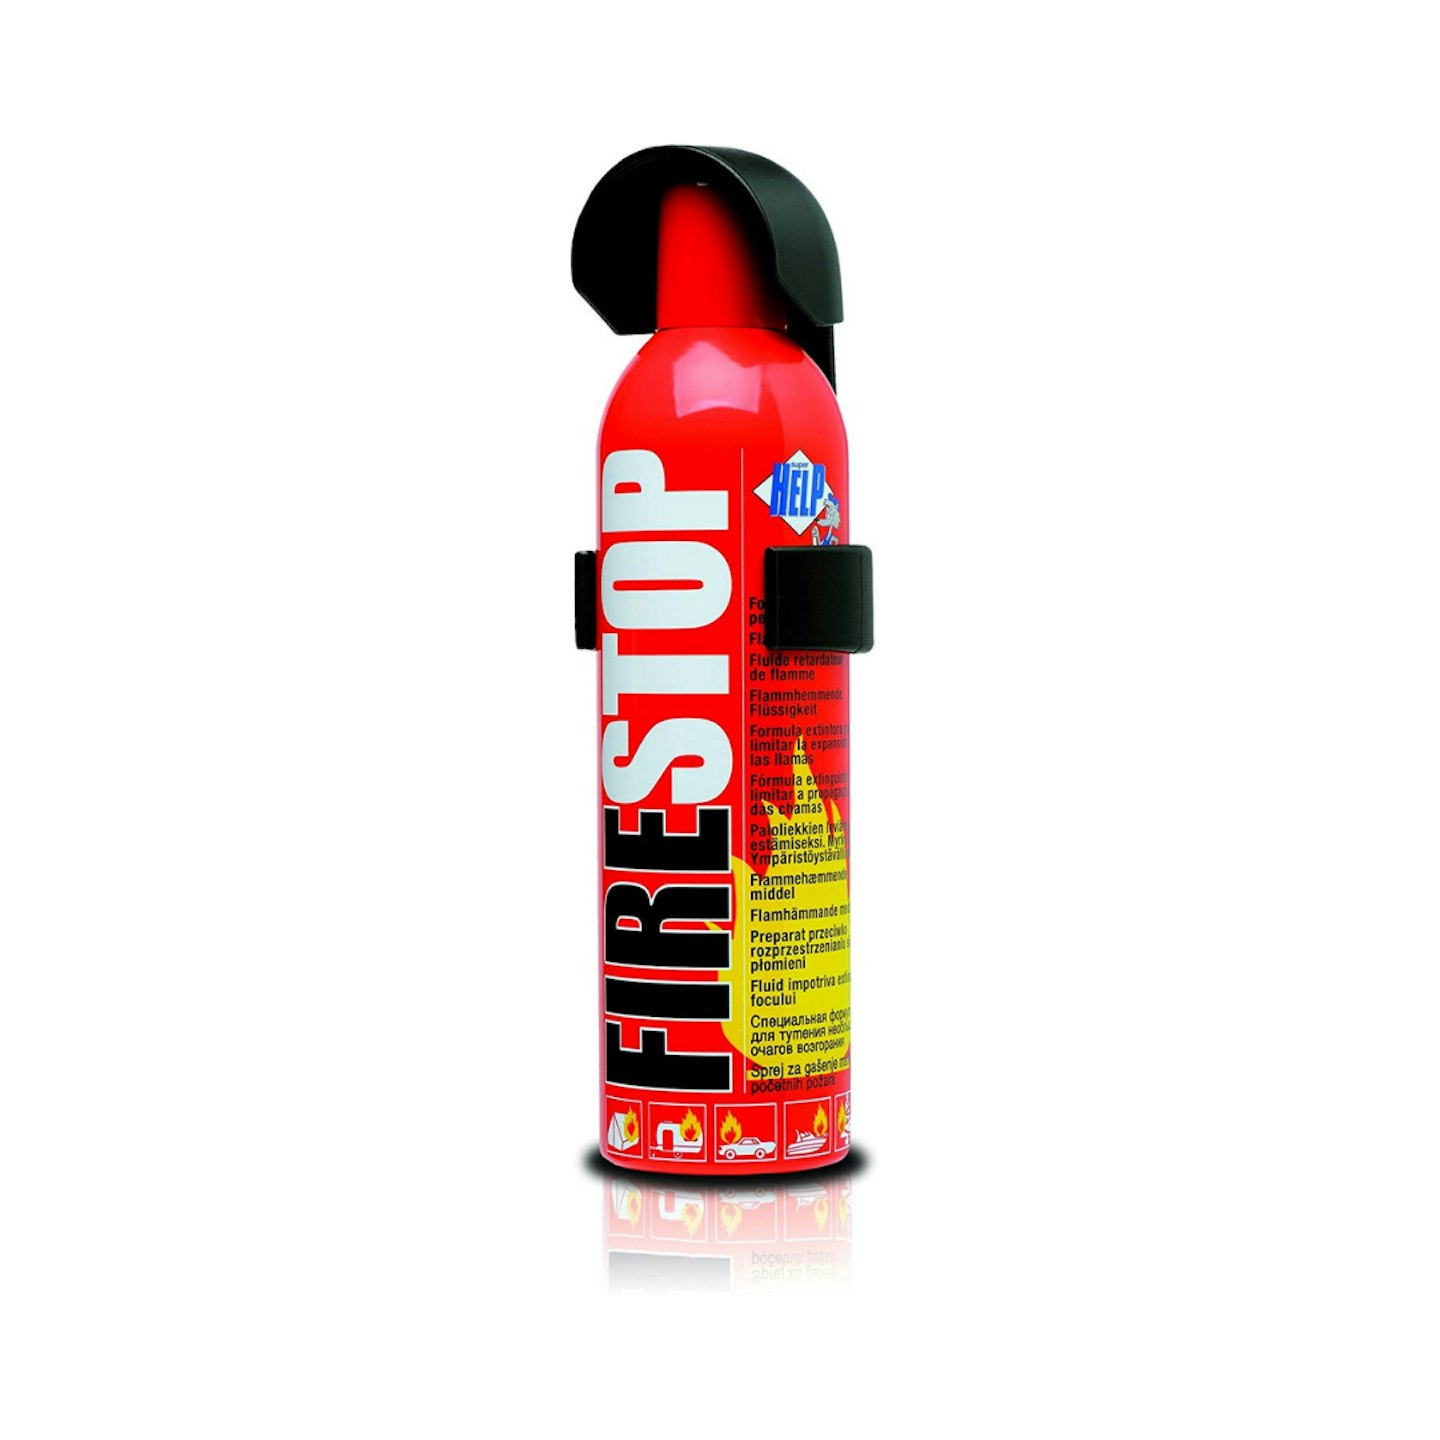 Super help sh2400 fire extinguisher for cars